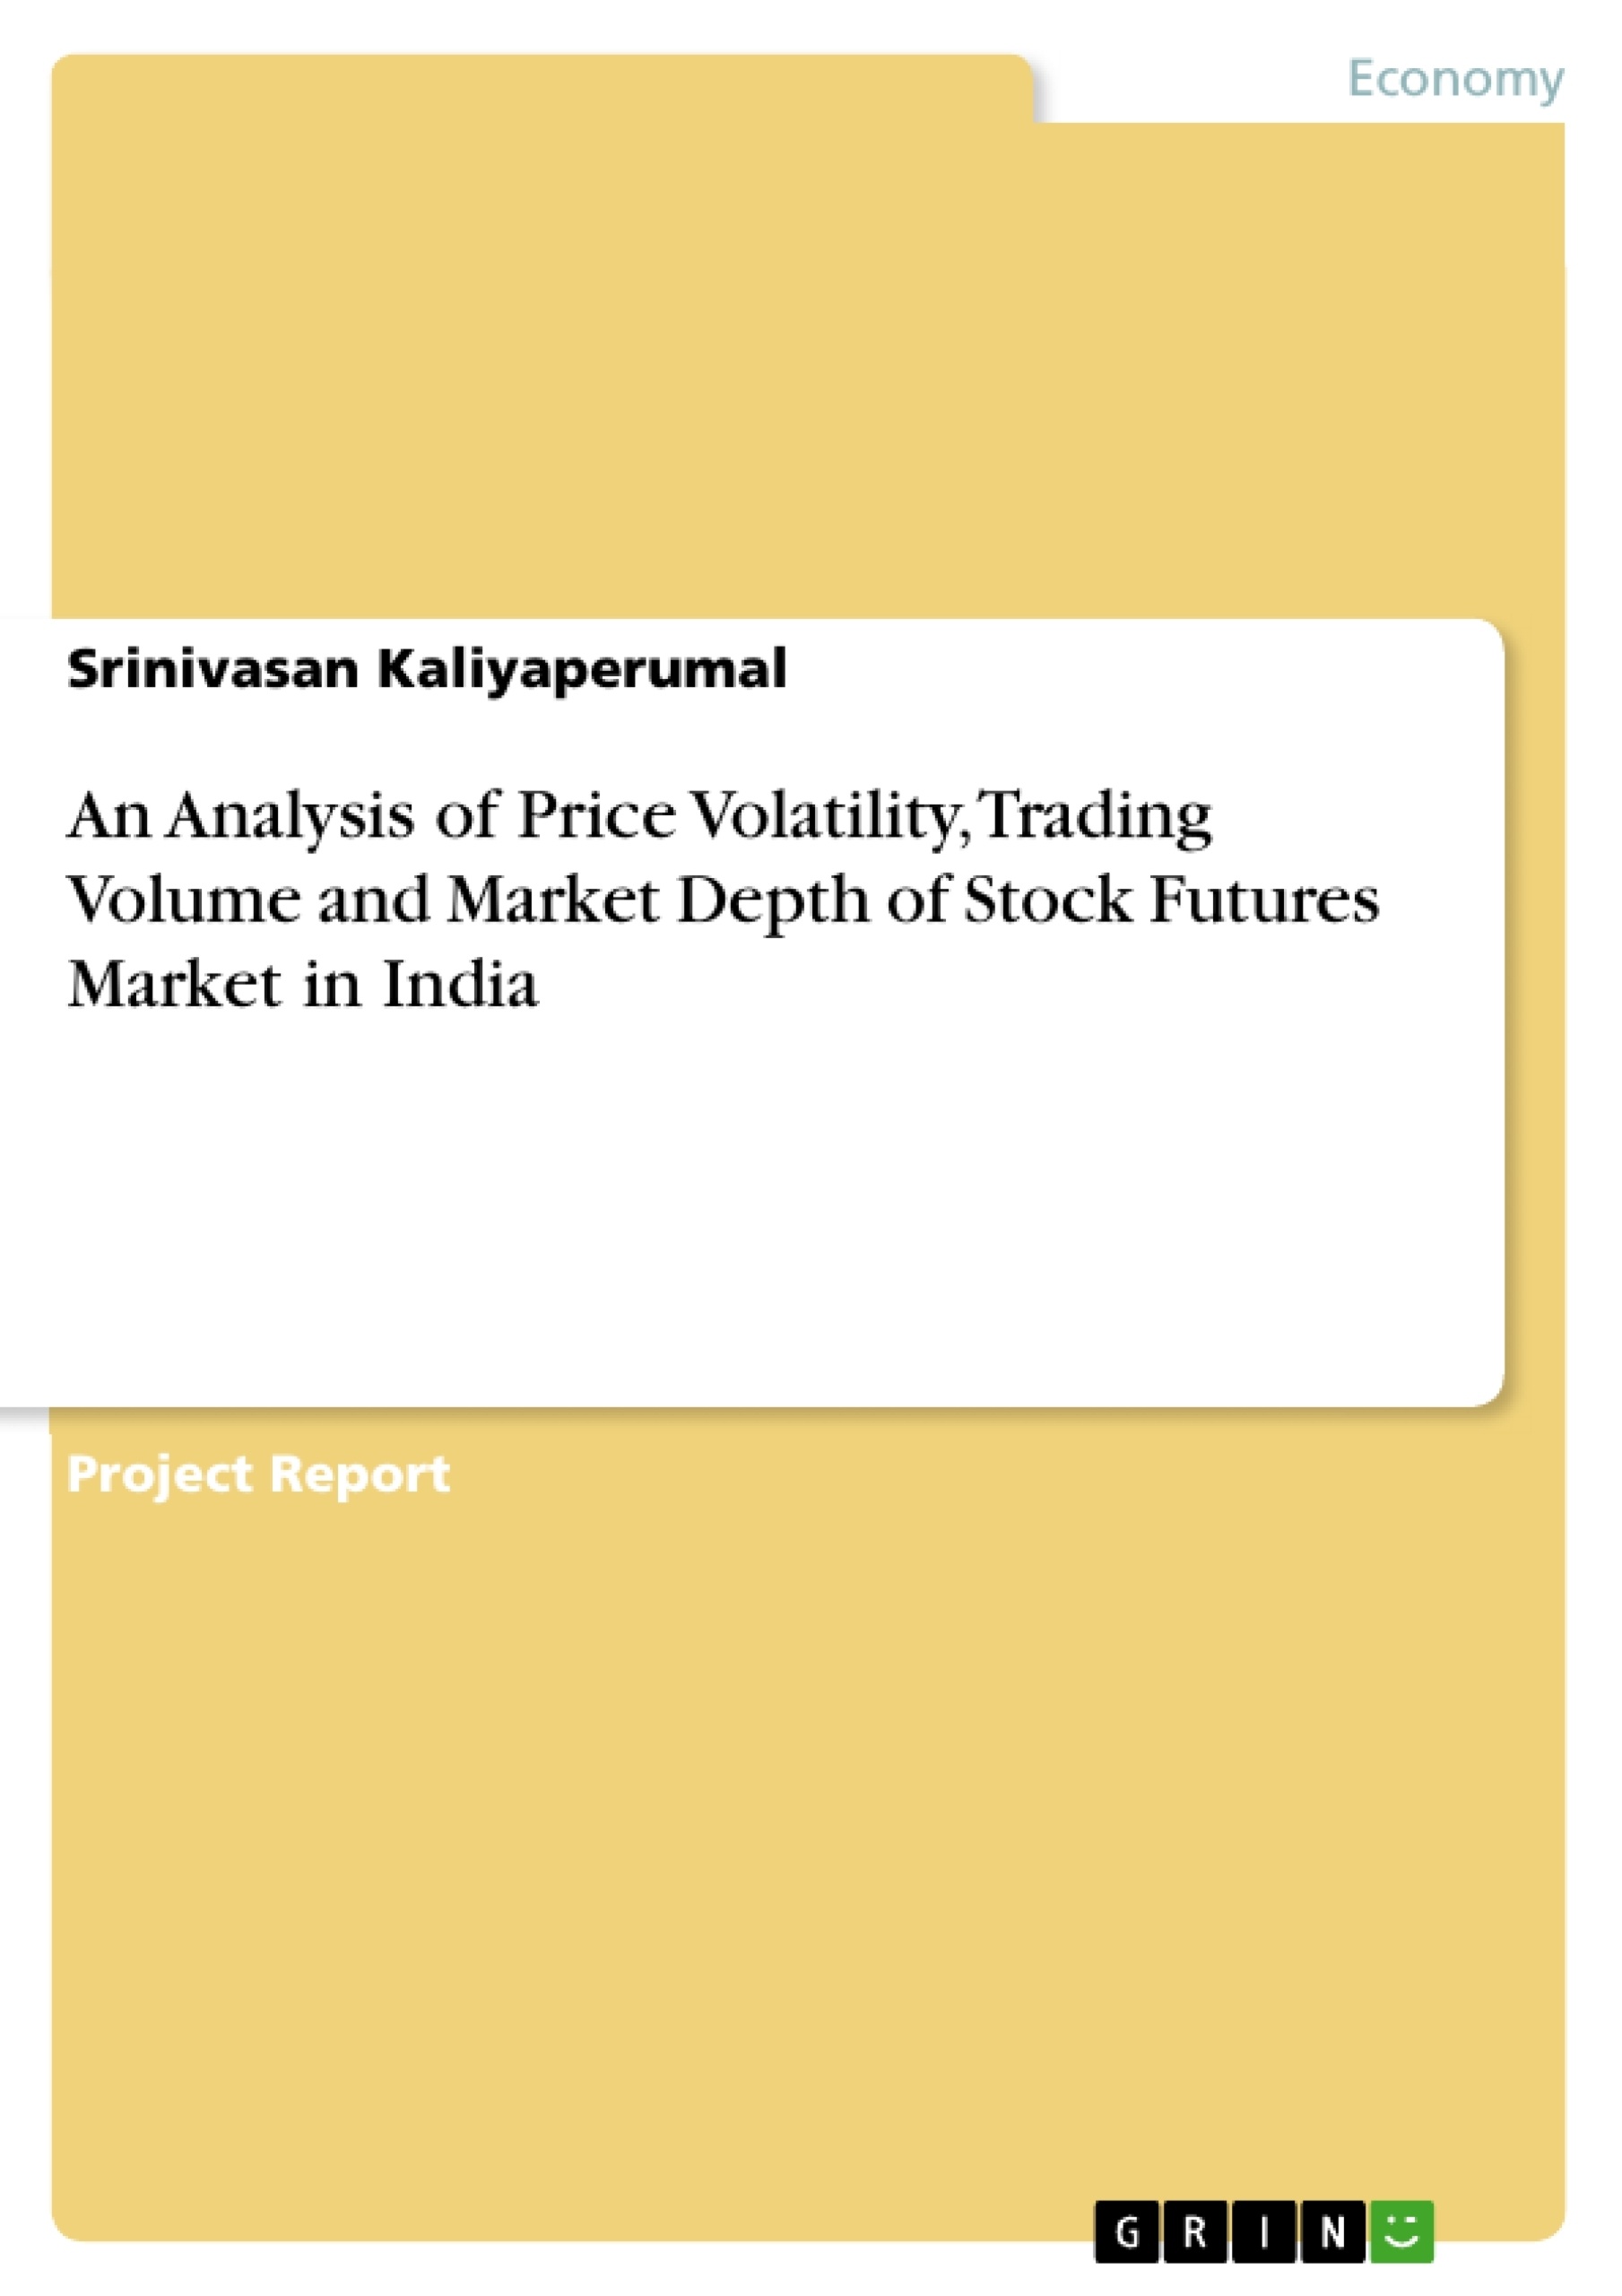 Titre: An Analysis of Price Volatility, Trading Volume and Market Depth of Stock Futures Market in India